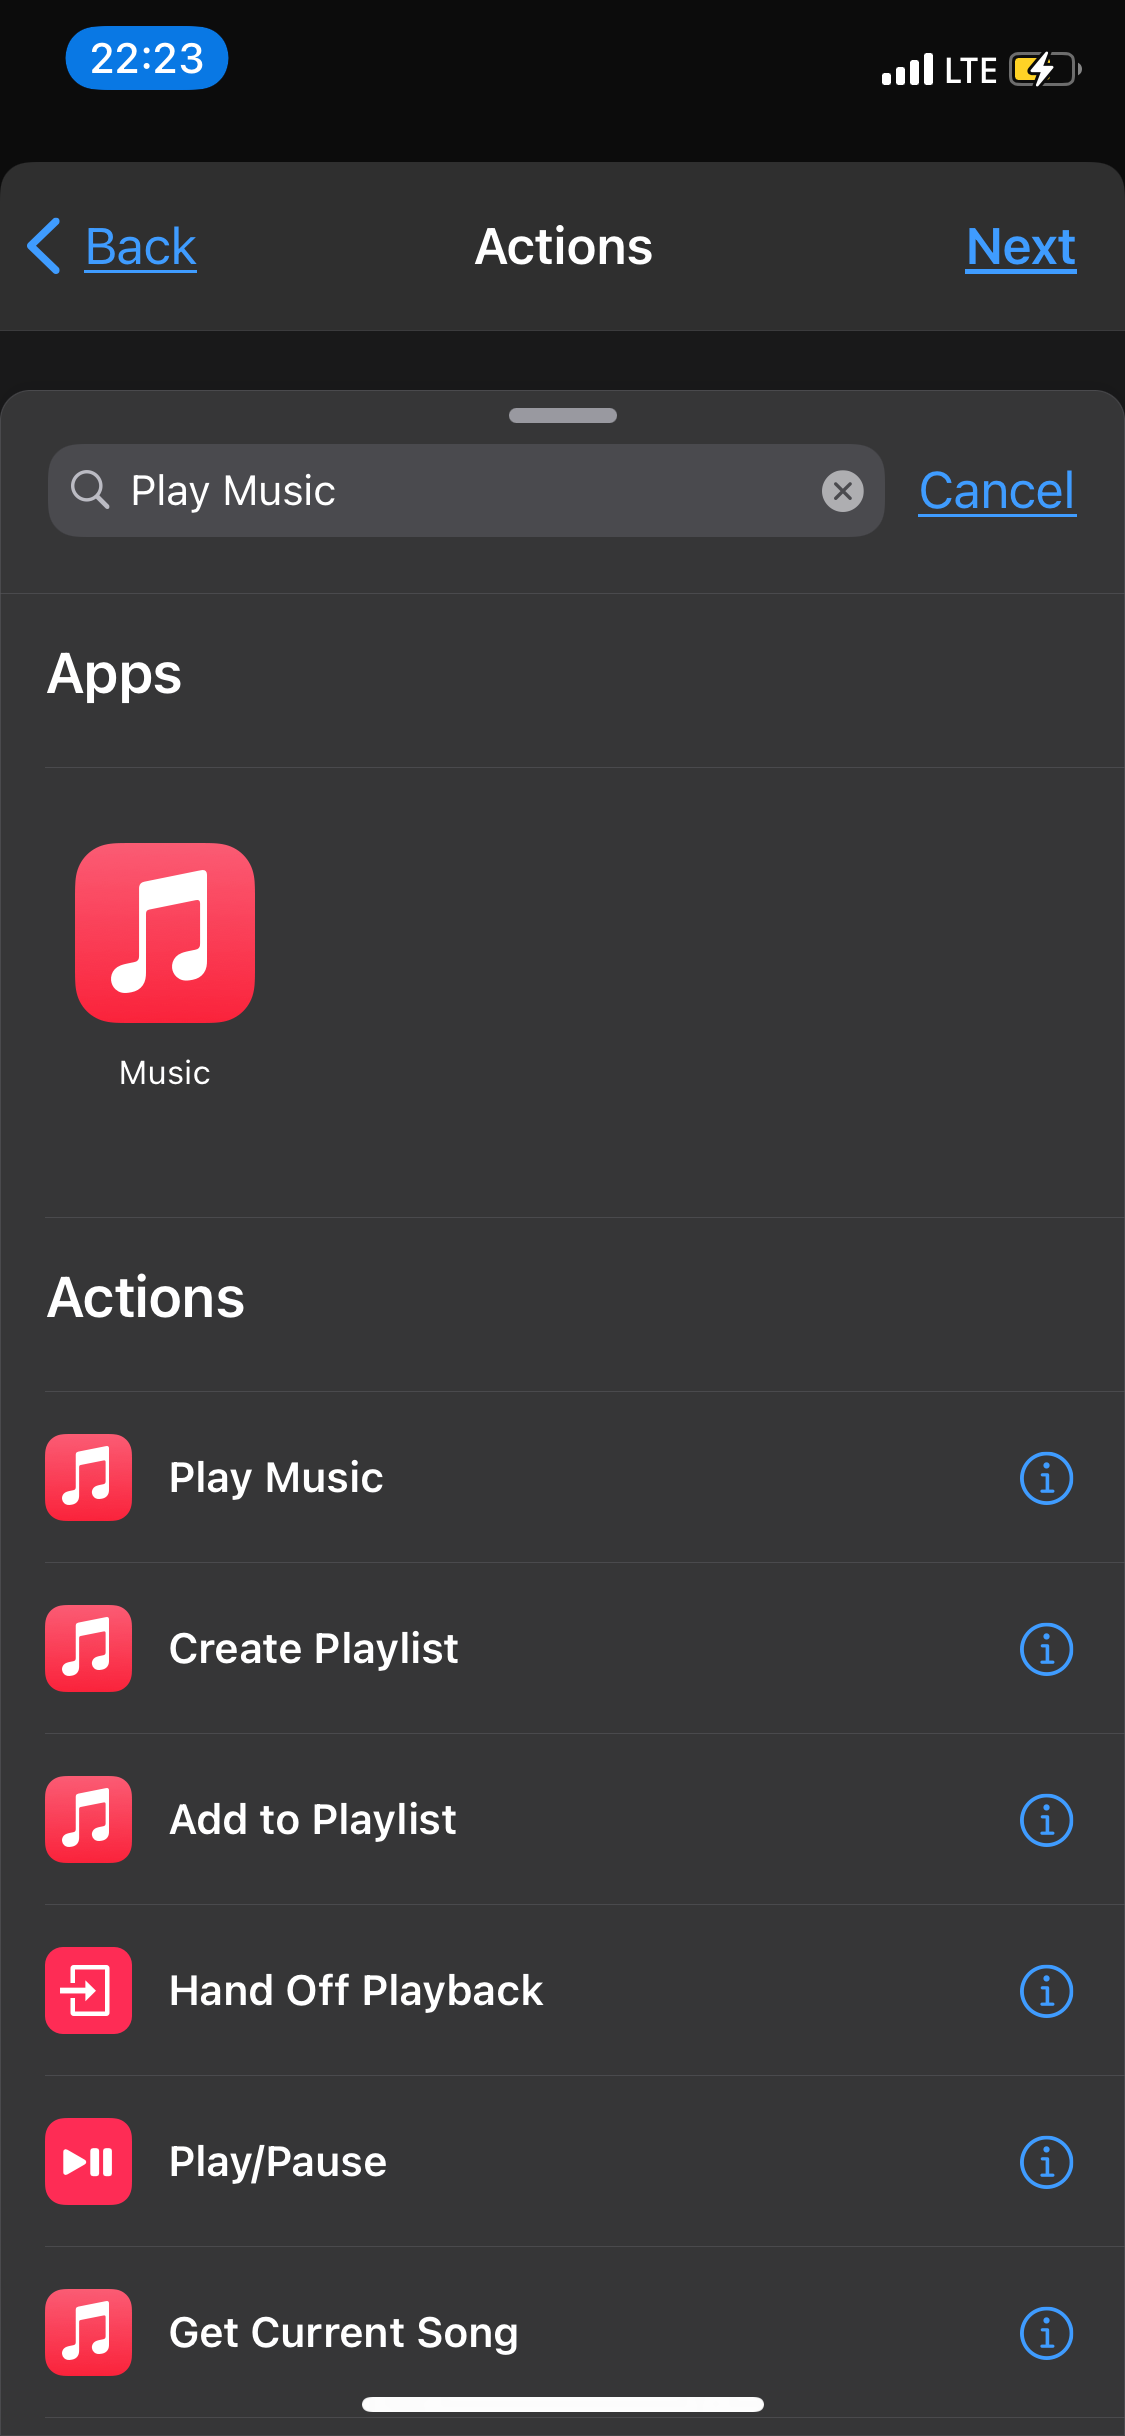 Music option in Shortcuts app.